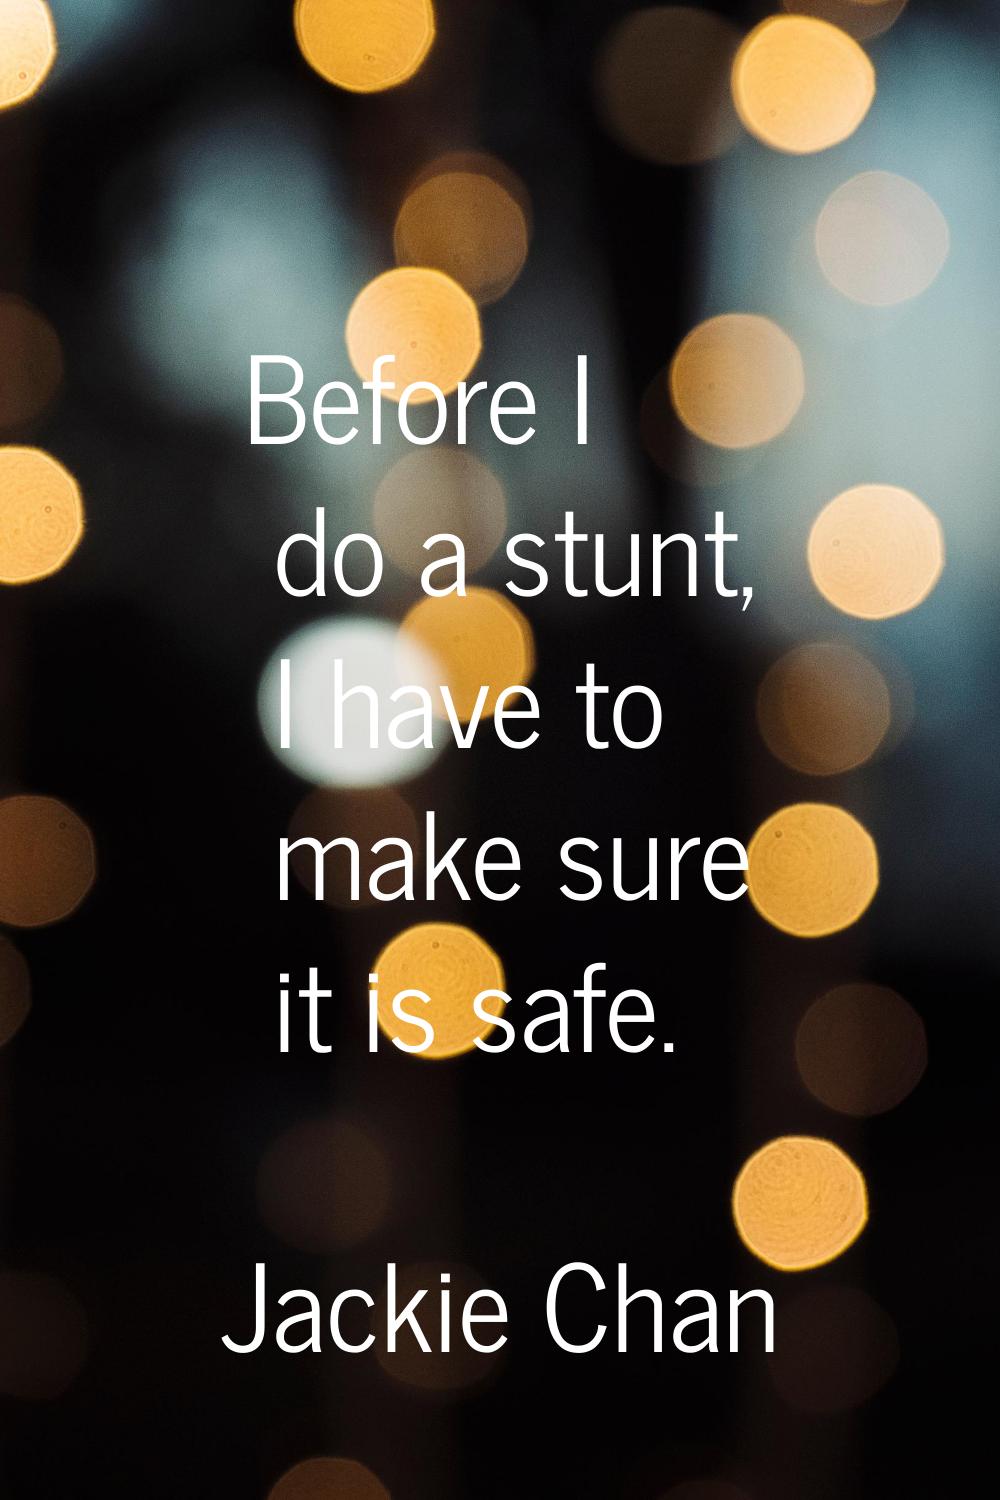 Before I do a stunt, I have to make sure it is safe.